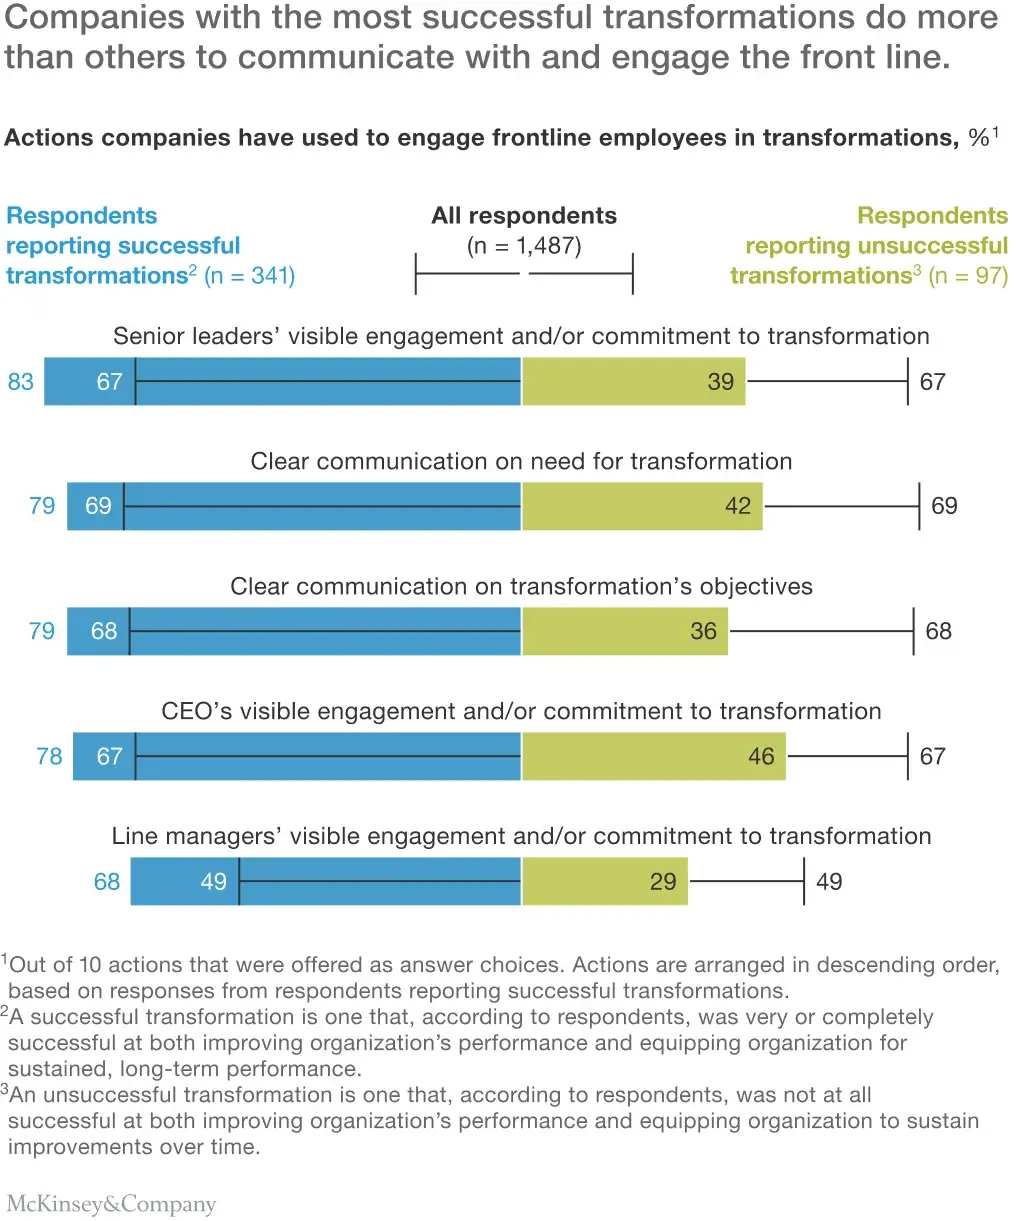 graph - actions companies have used to engage frontline employees in transformations